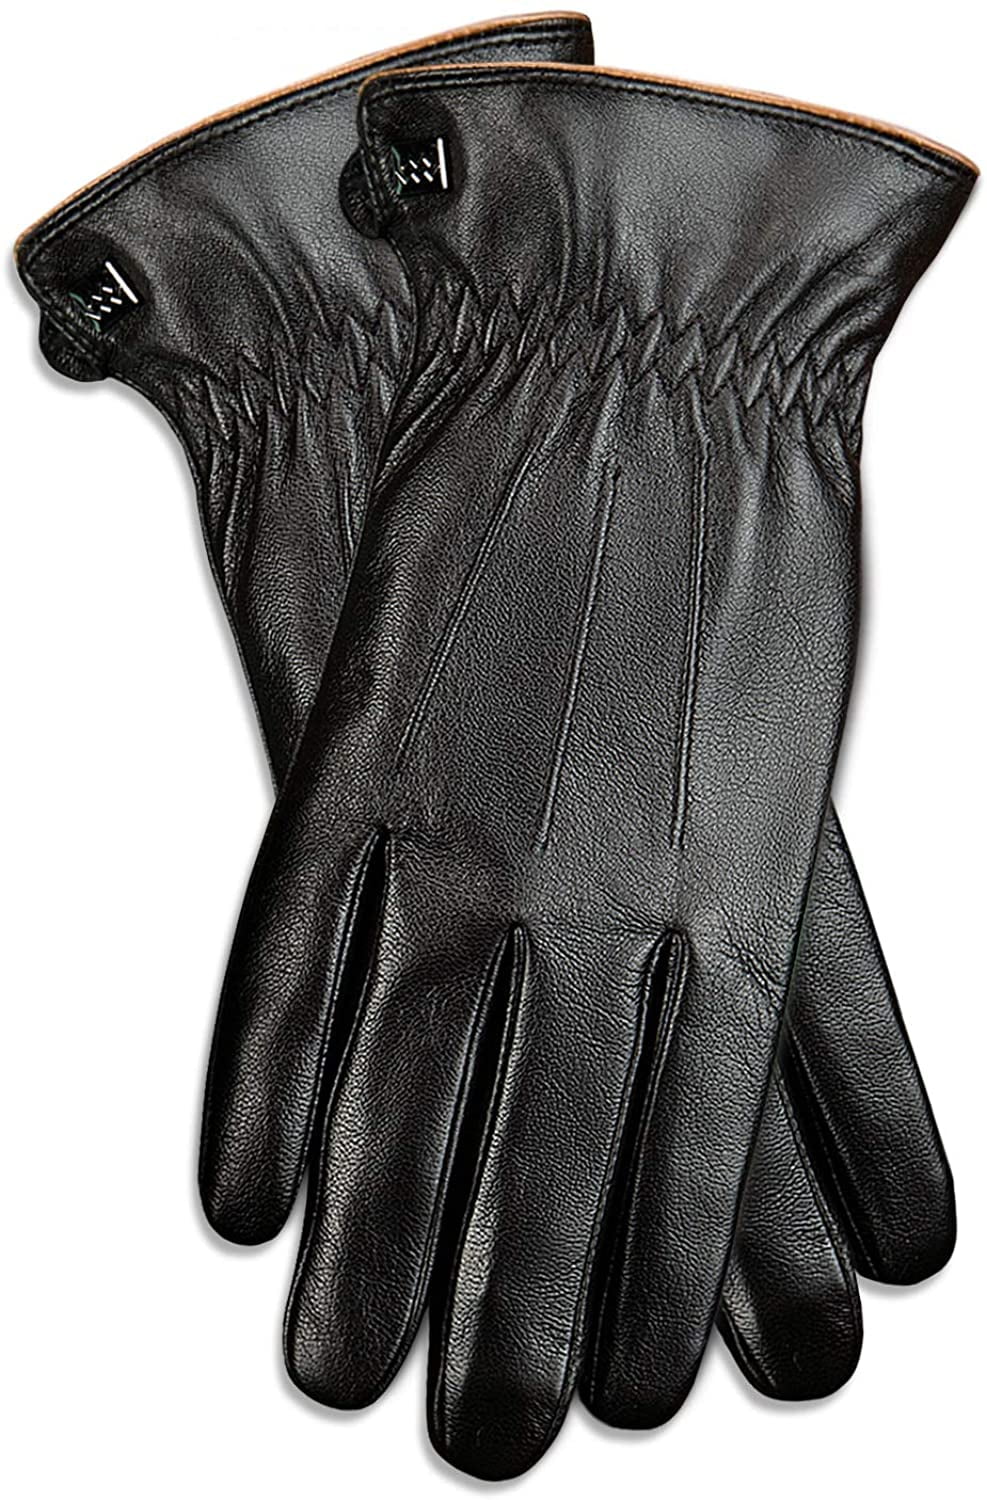 PPE Genuine soft cow Nappa leather Driving Winter Retro Gloves work gloves 